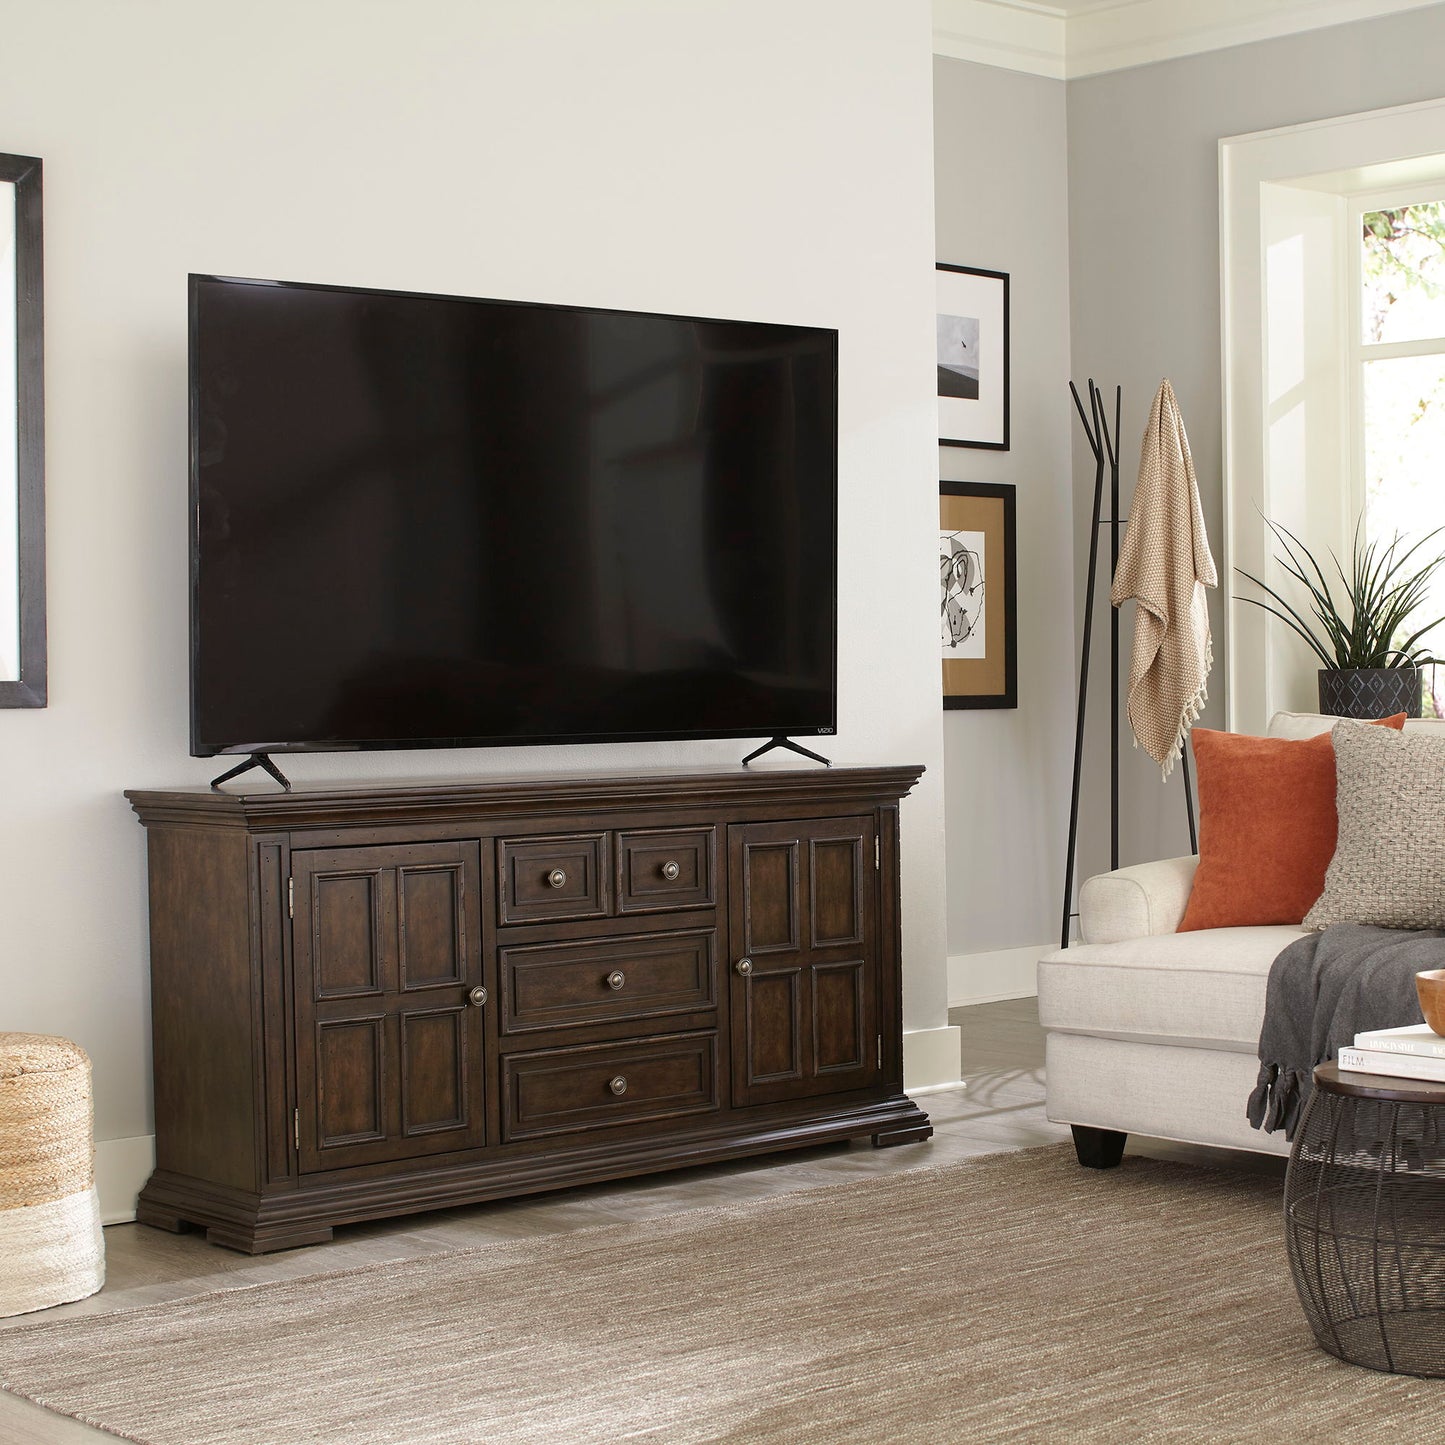 Big Valley - 66" TV Console - Light Brown